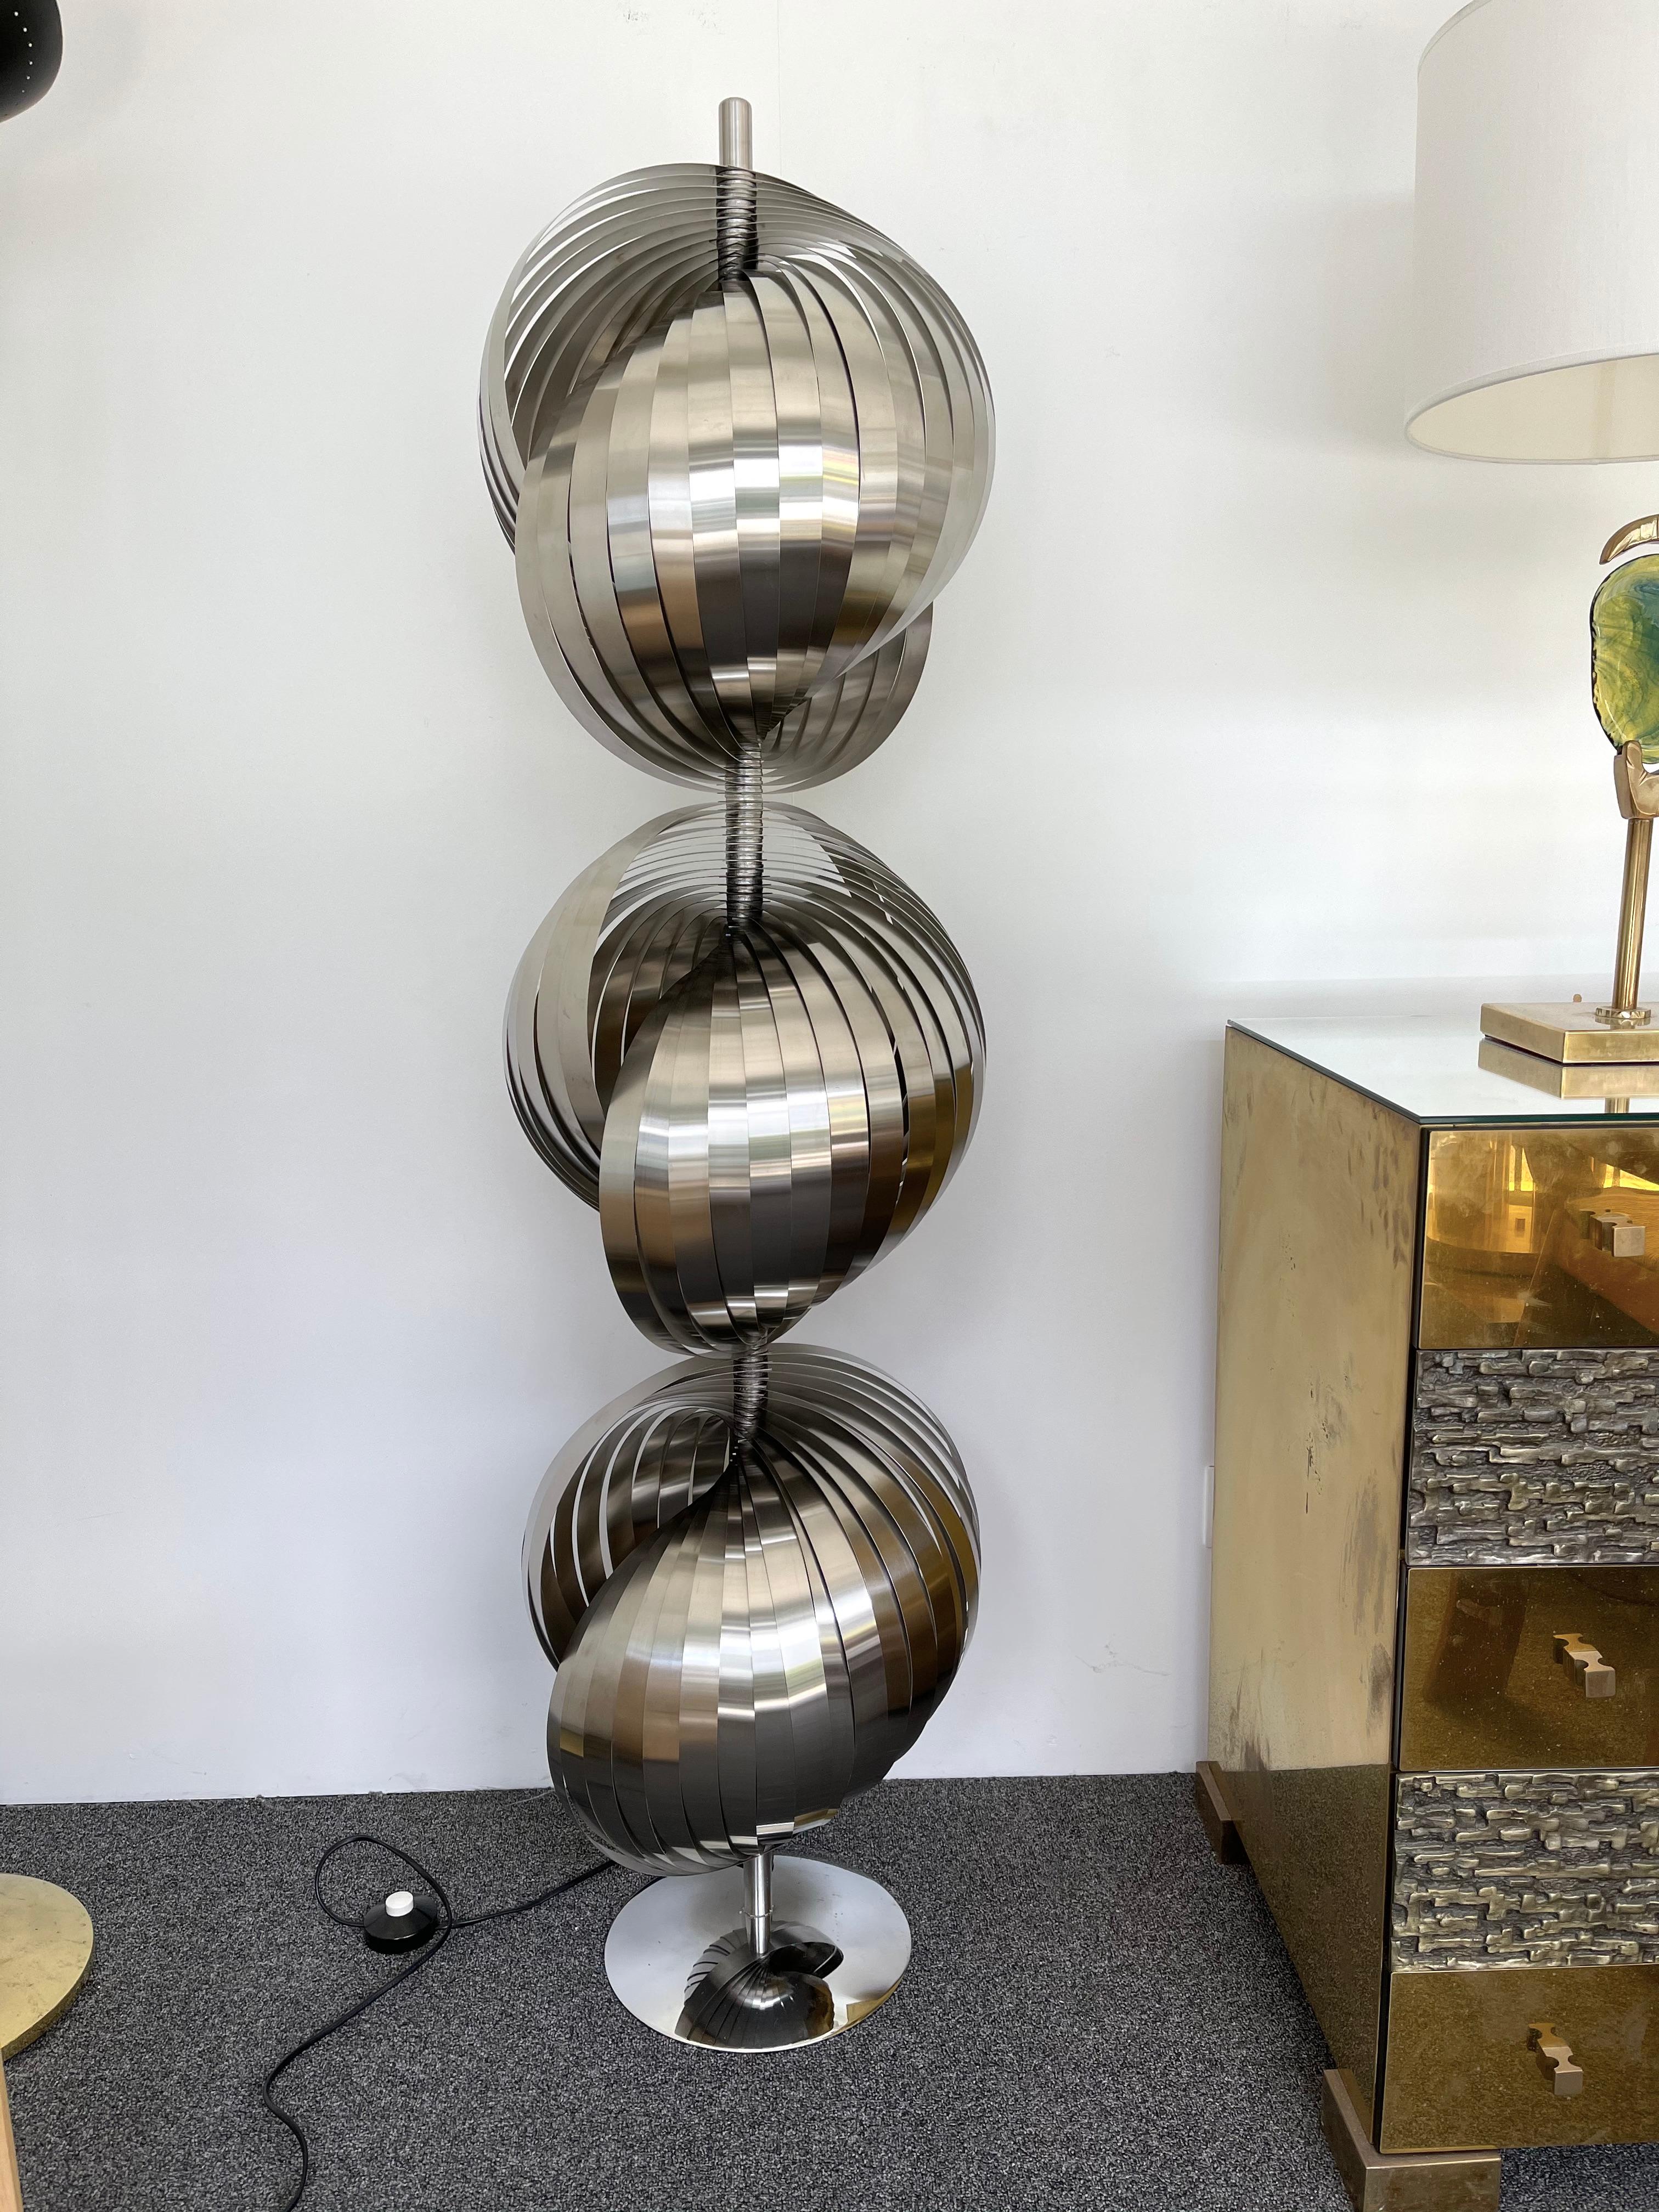 Floor lamp spiral in metal, chrome base by the french designer Henri Mathieu.

Price listed by floor lamp. In sale separately. price by item.